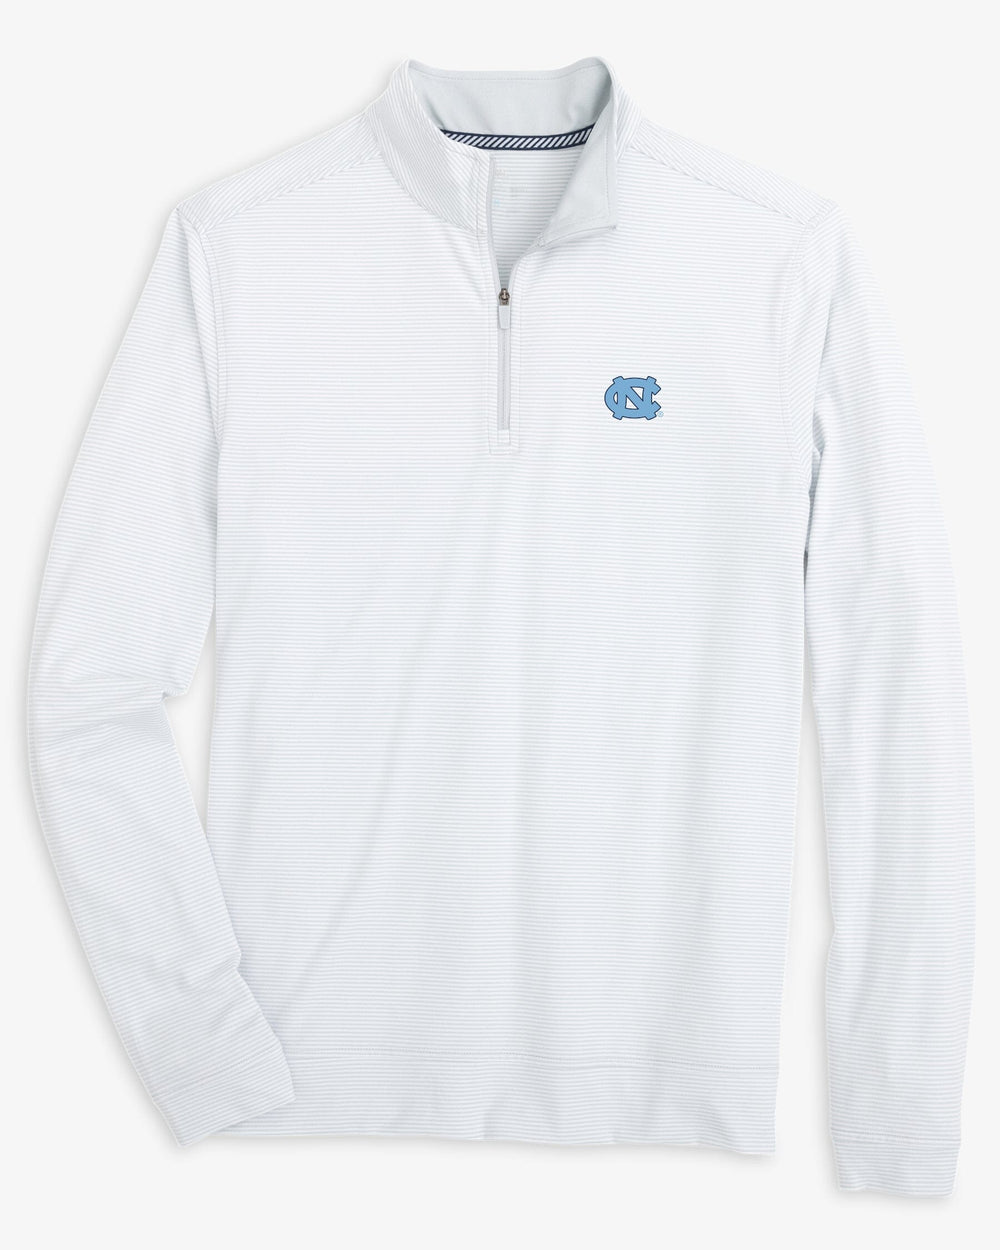 The front view of the UNC Tar Heels Cruiser Micro-Stripe Heather Quarter Zip by Southern Tide - Heather Slate Grey